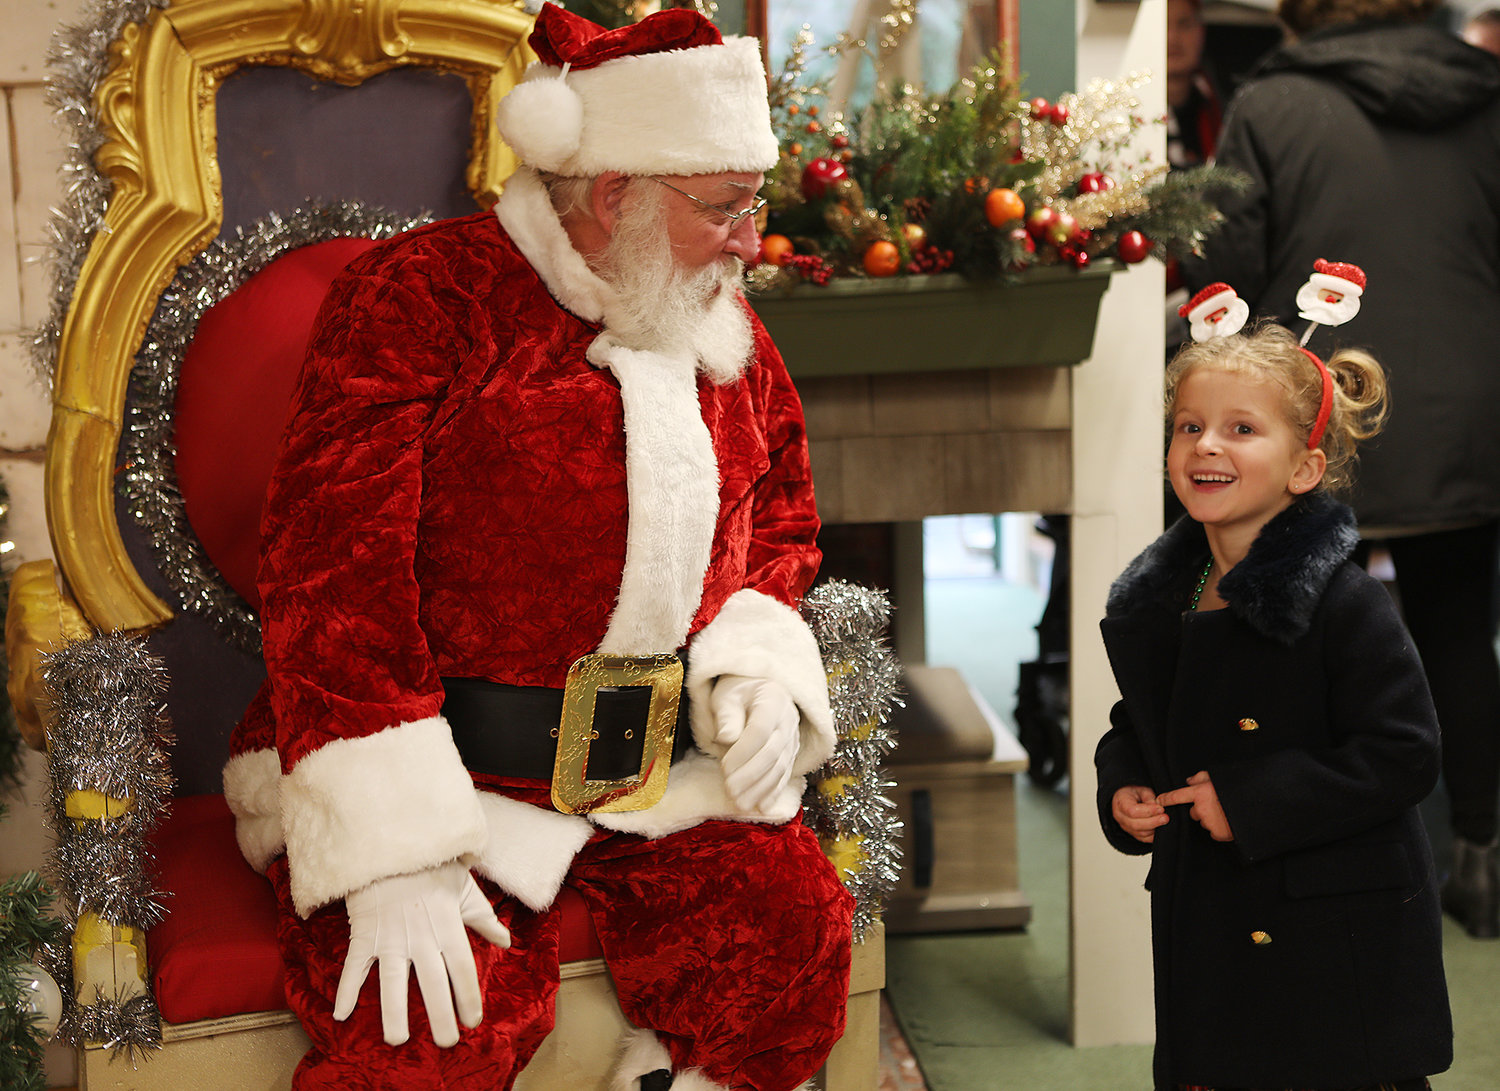 DECEMBER 3, 2022 -- Santa listens to the wishes of Charlotte Mangano, 5, of Portsmouth, NH, in the Discovery Room of the Whaling Museum during Christmas Stroll on Main Street. Photo by Ray K. Saunders